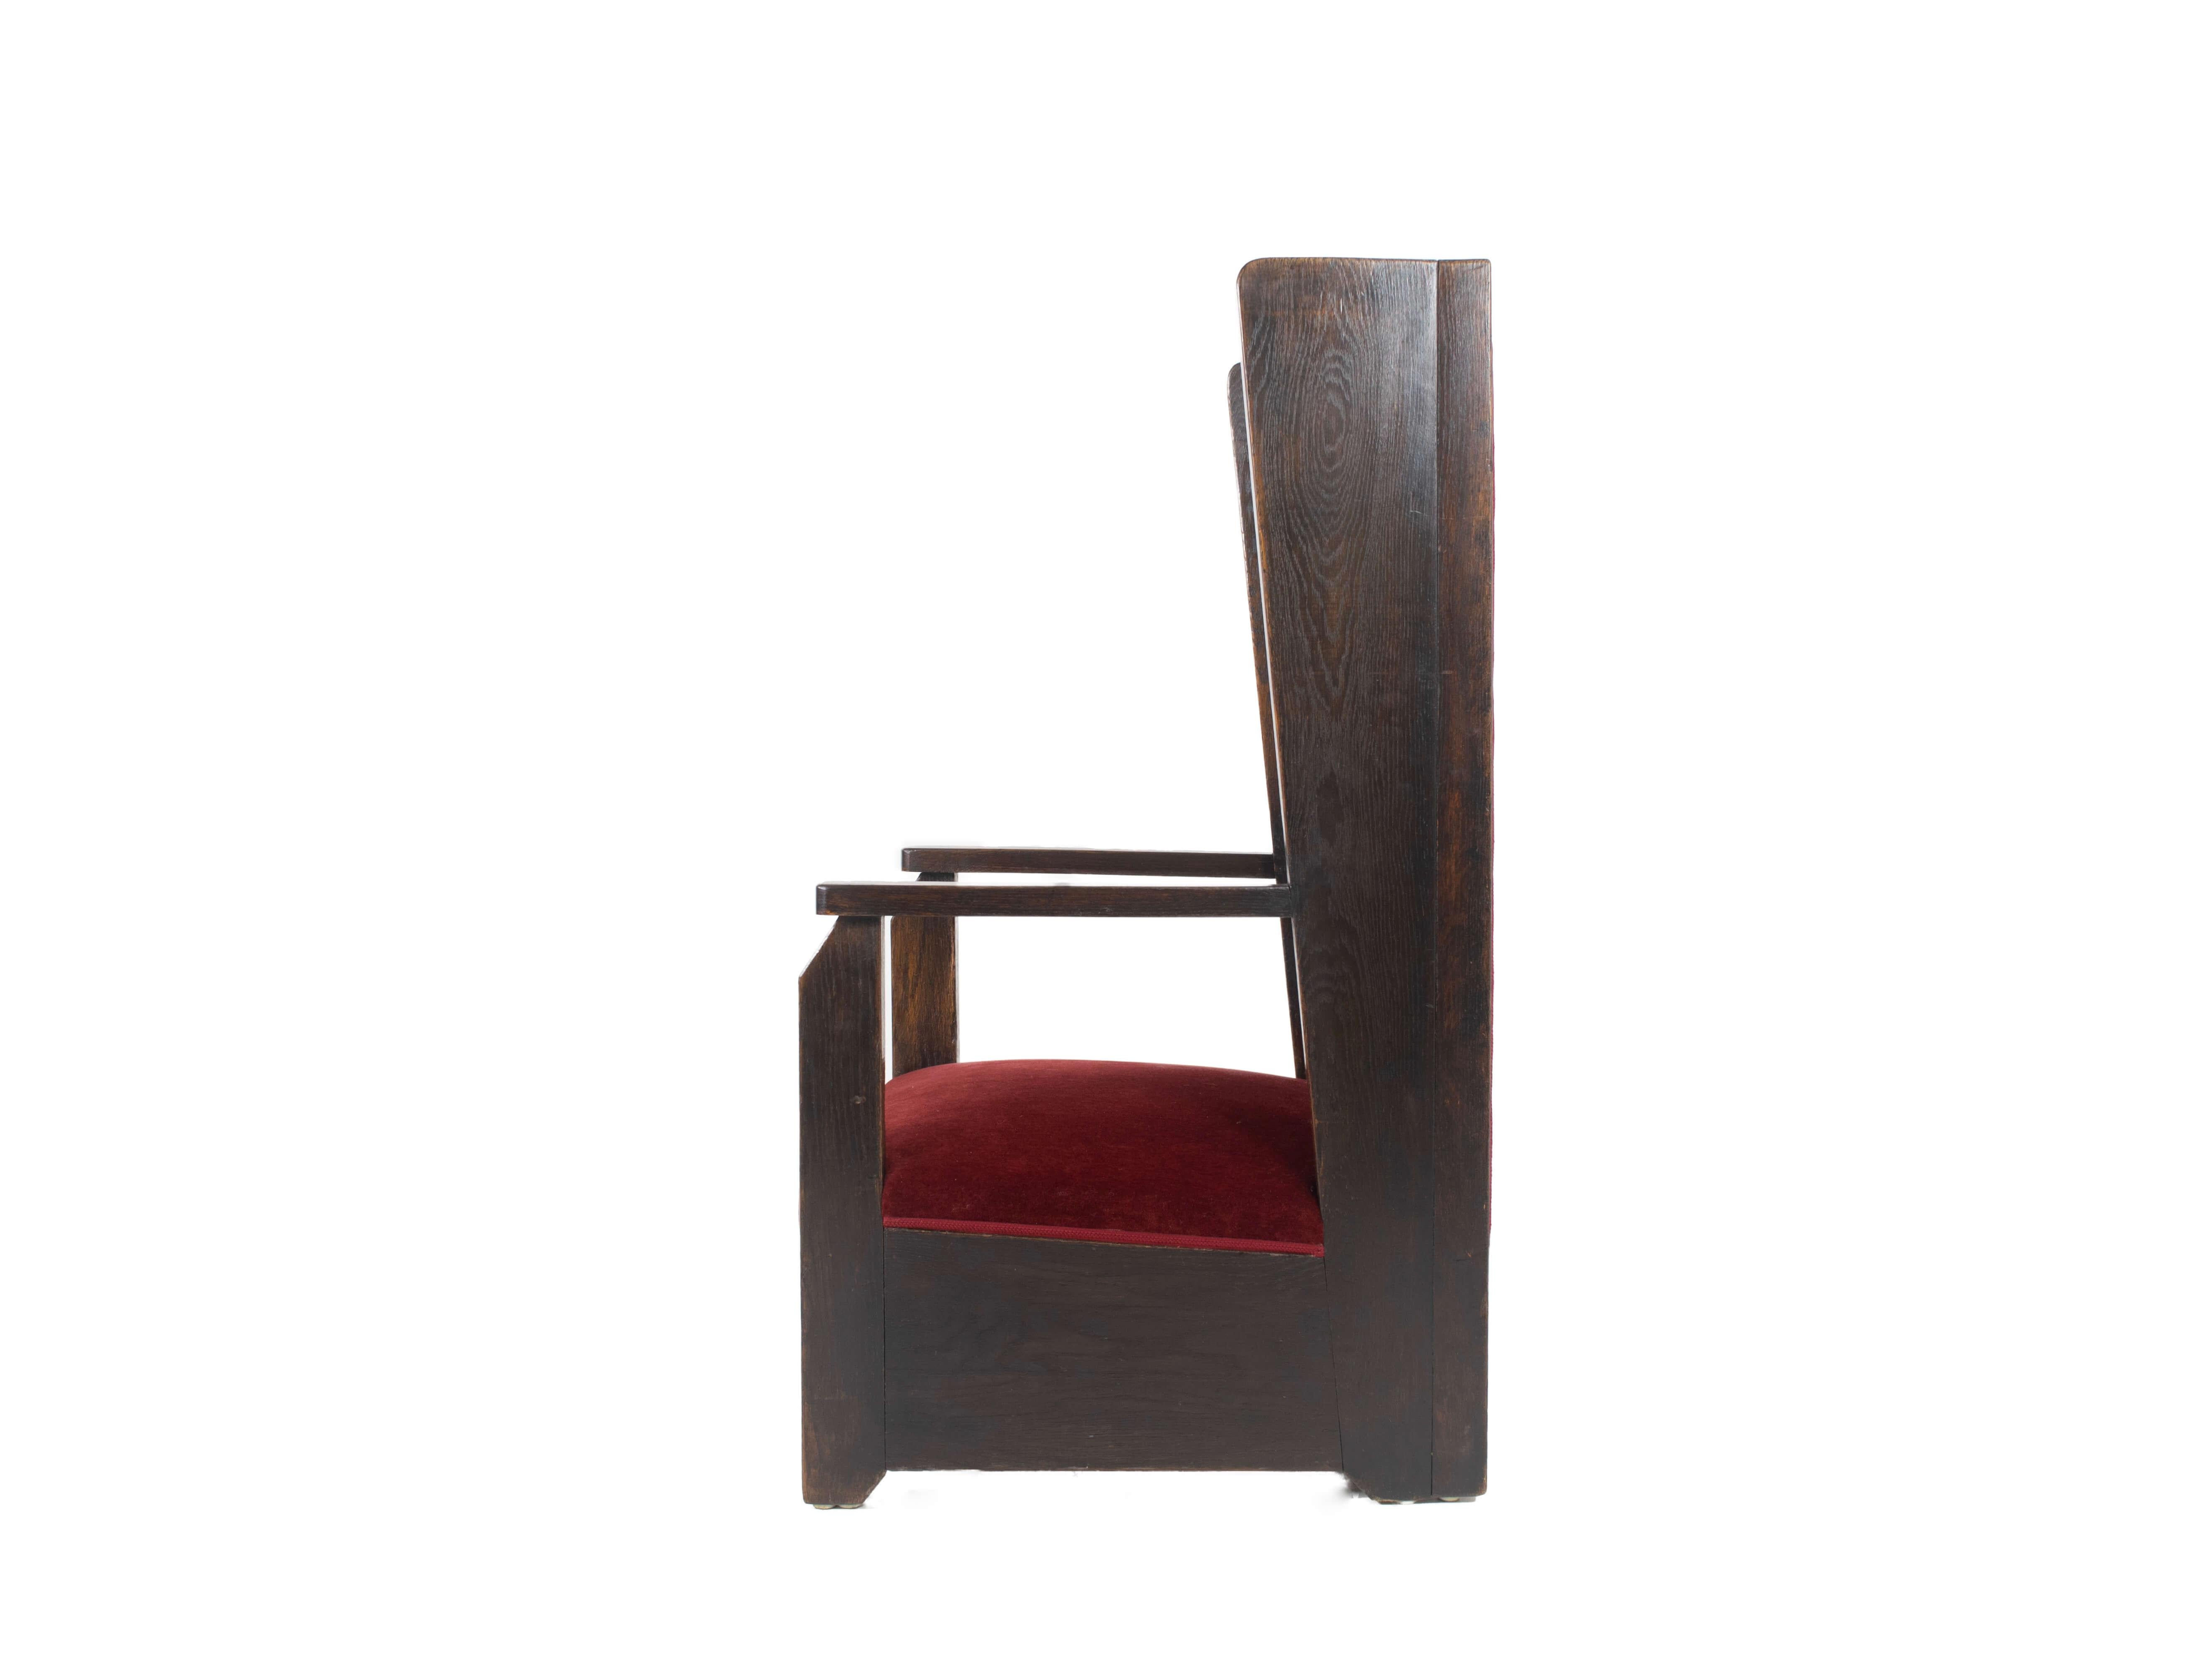 Early Hendrik Wouda arm chair The Hague school, The Netherlands 1910-1920. An important historical piece from one of the founders of the 'The Hague School'. Two experts indicated it is most probably a prototype of the chair shown in the book